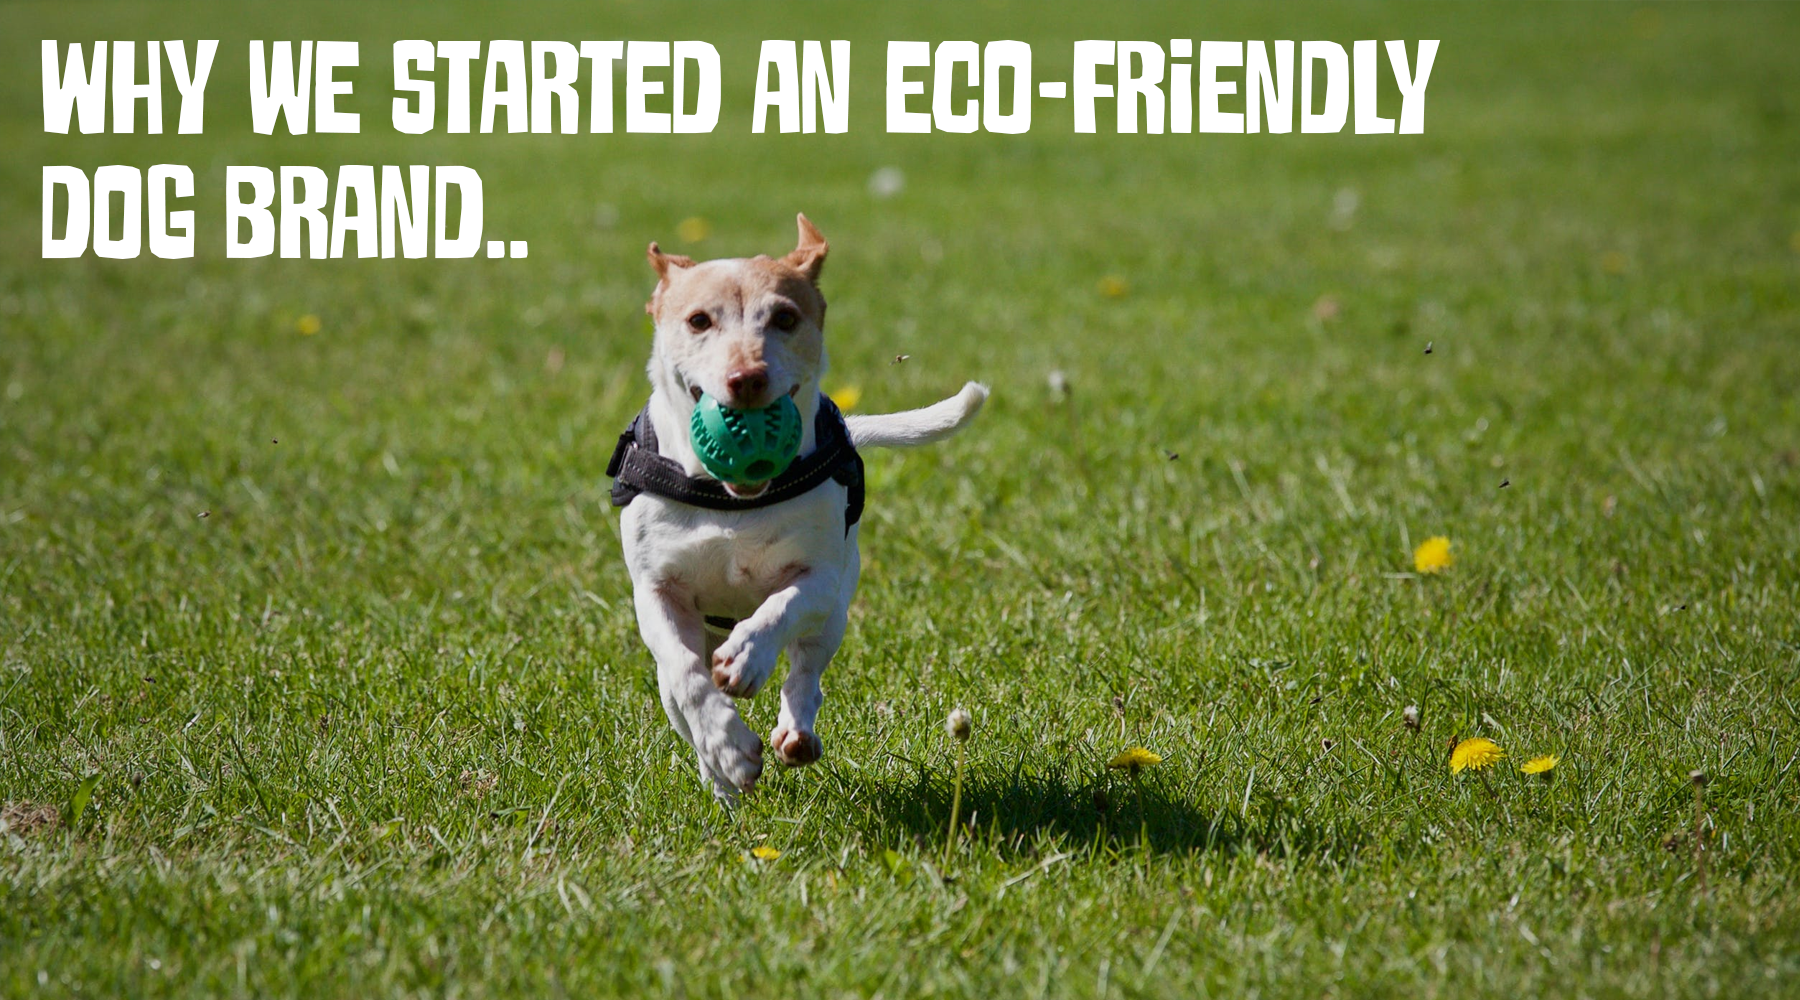 Why We Started an Eco-Friendly Pet Brand